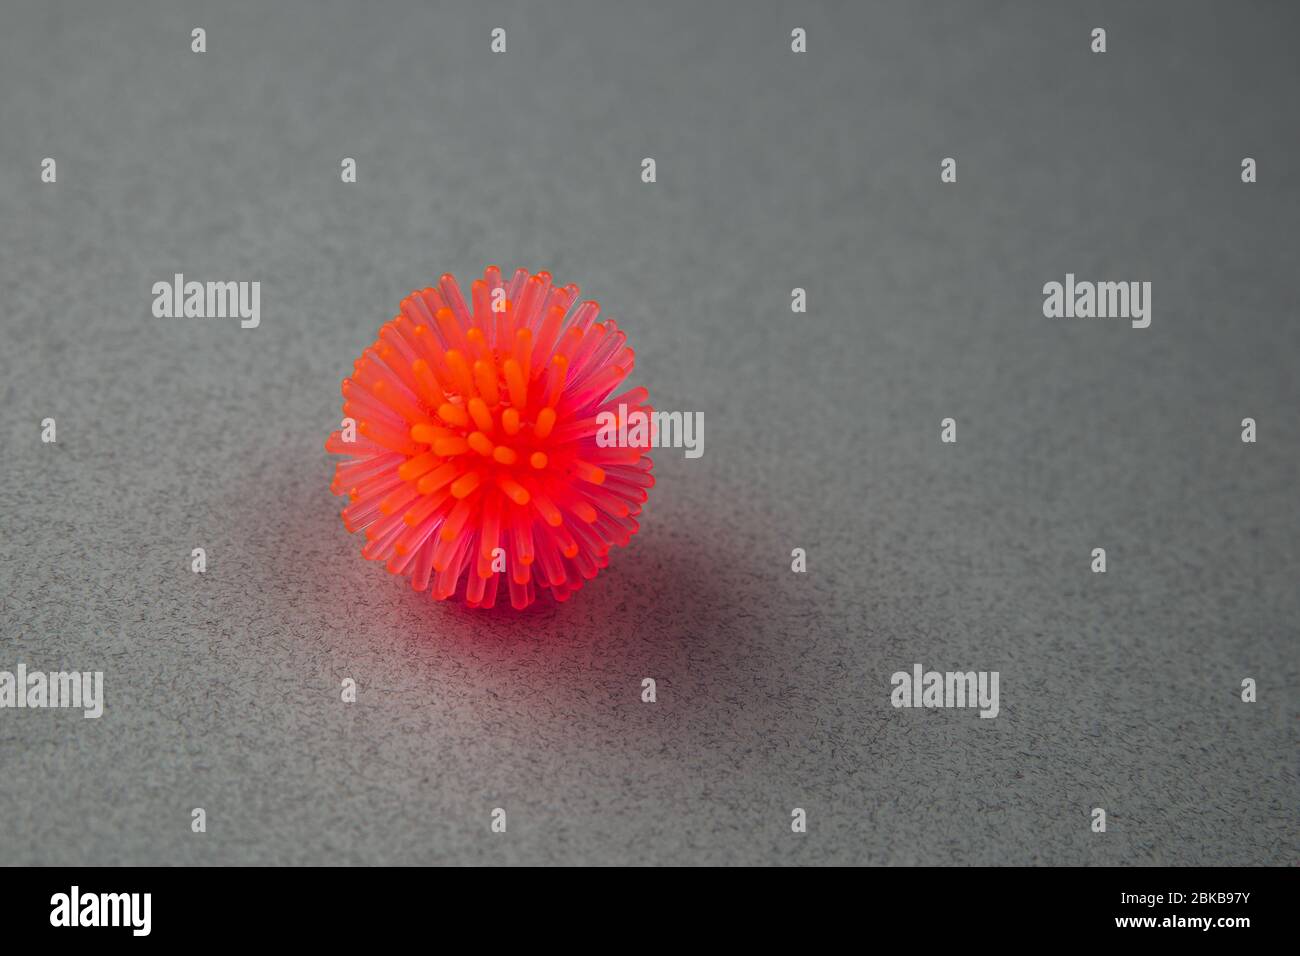 Abstract virus strain model of Coronavirus disease COVID-19 on a grey background . Copy space. Virus Pandemic Protection Concept Stock Photo